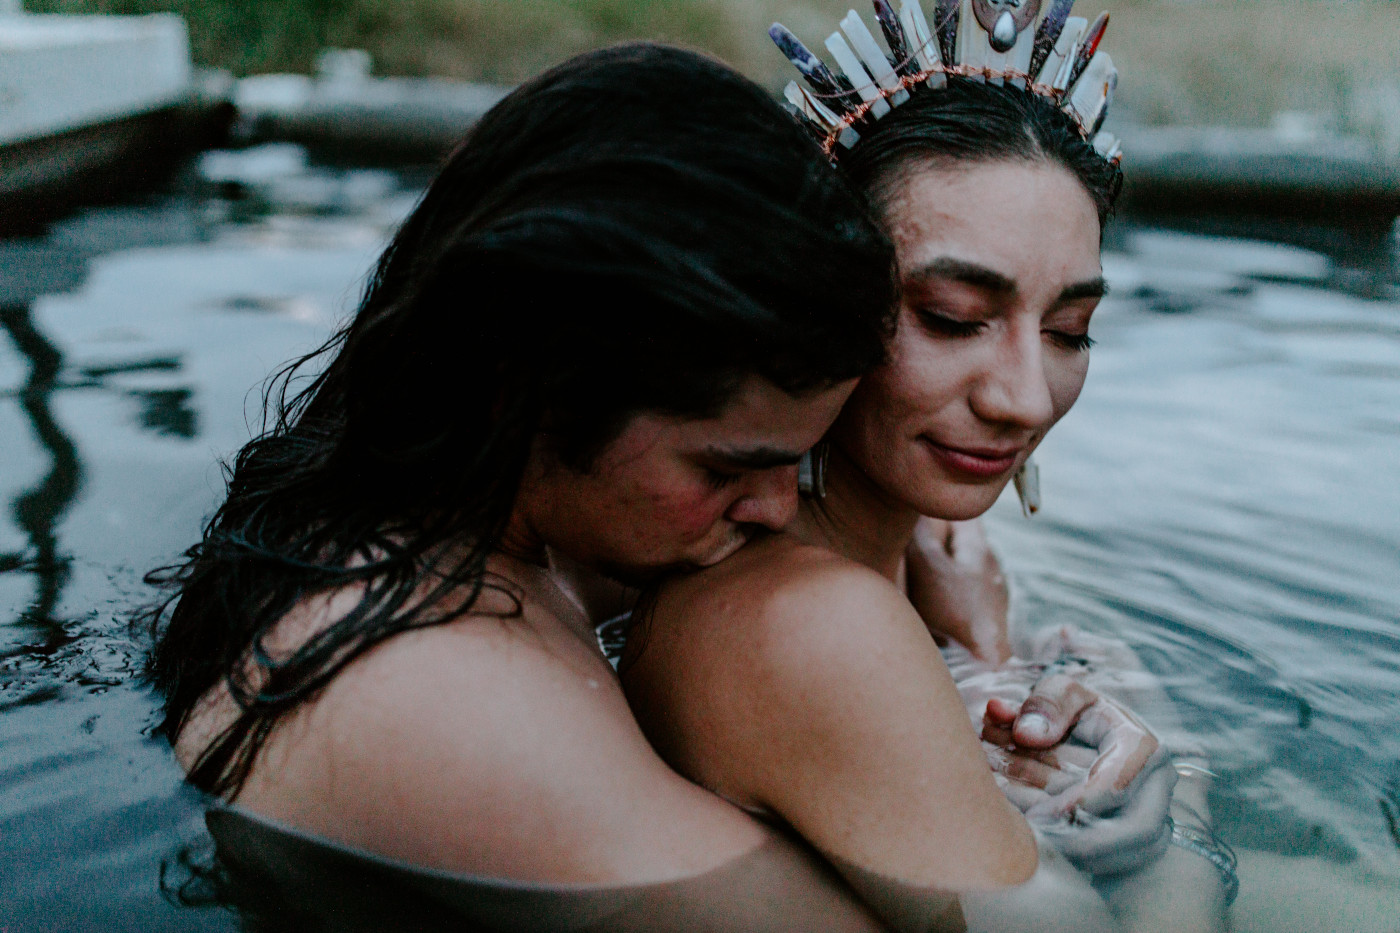 Emerald and Cameron hug in the hot springs.